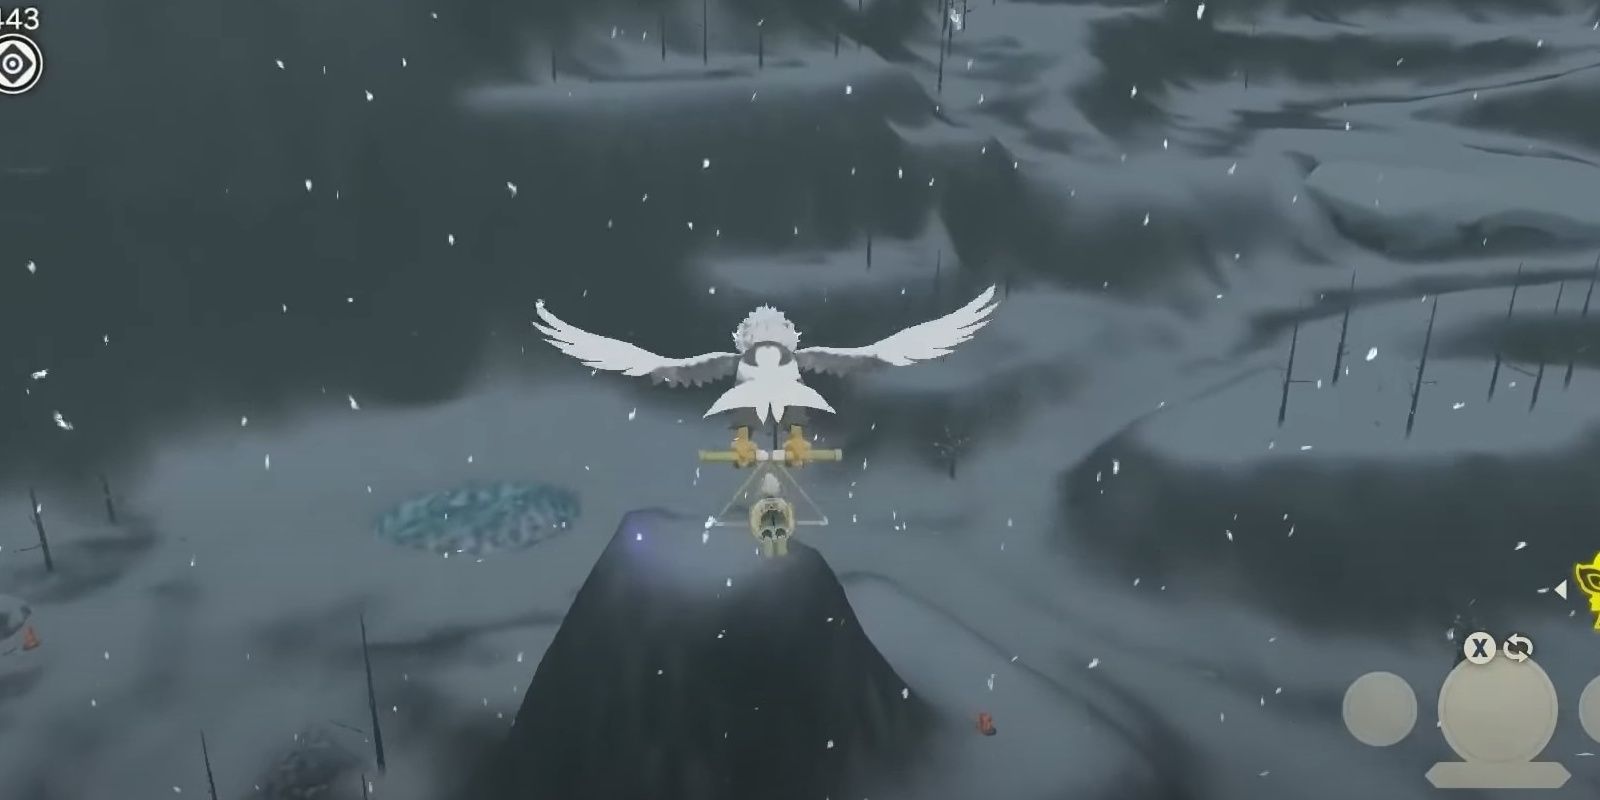 The Pokemon Legends Arceus is flying around with their Hisuian Braviary spotting a wisp on a snowy rock formation in Avalanche Slopes with an icy opening in the snow.